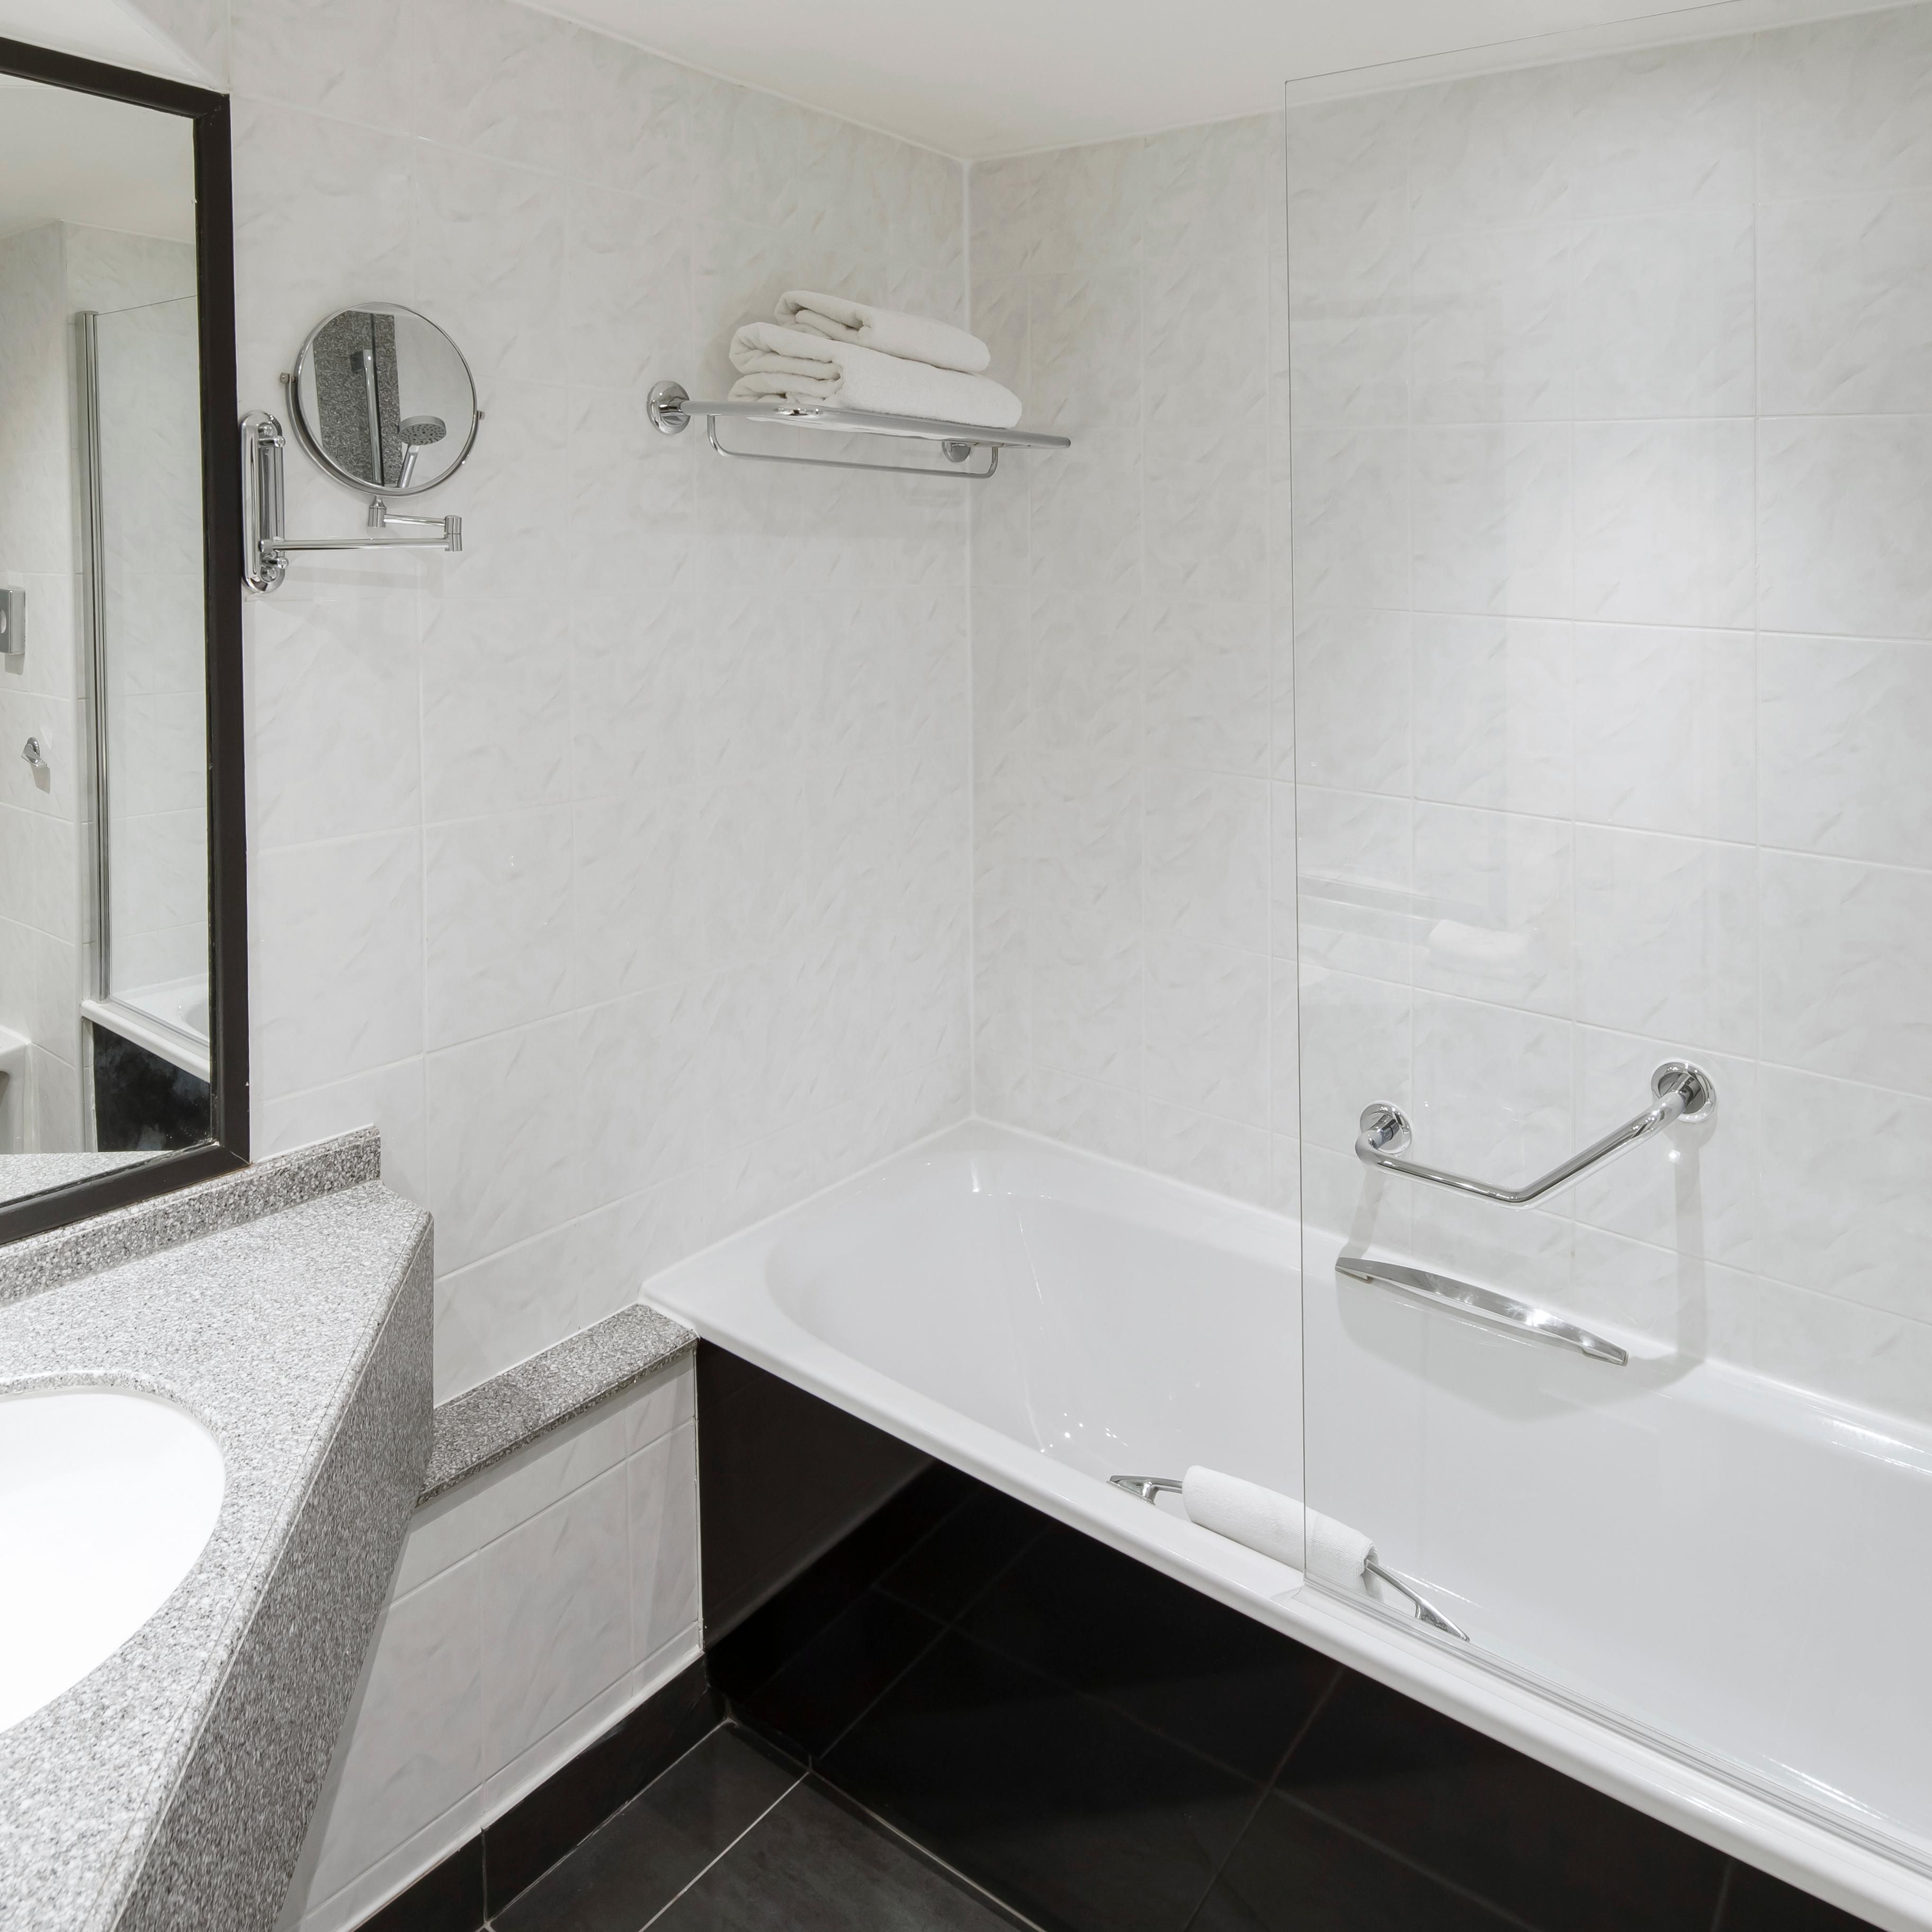 Refresh in a bath or shower in our spacious bathrooms